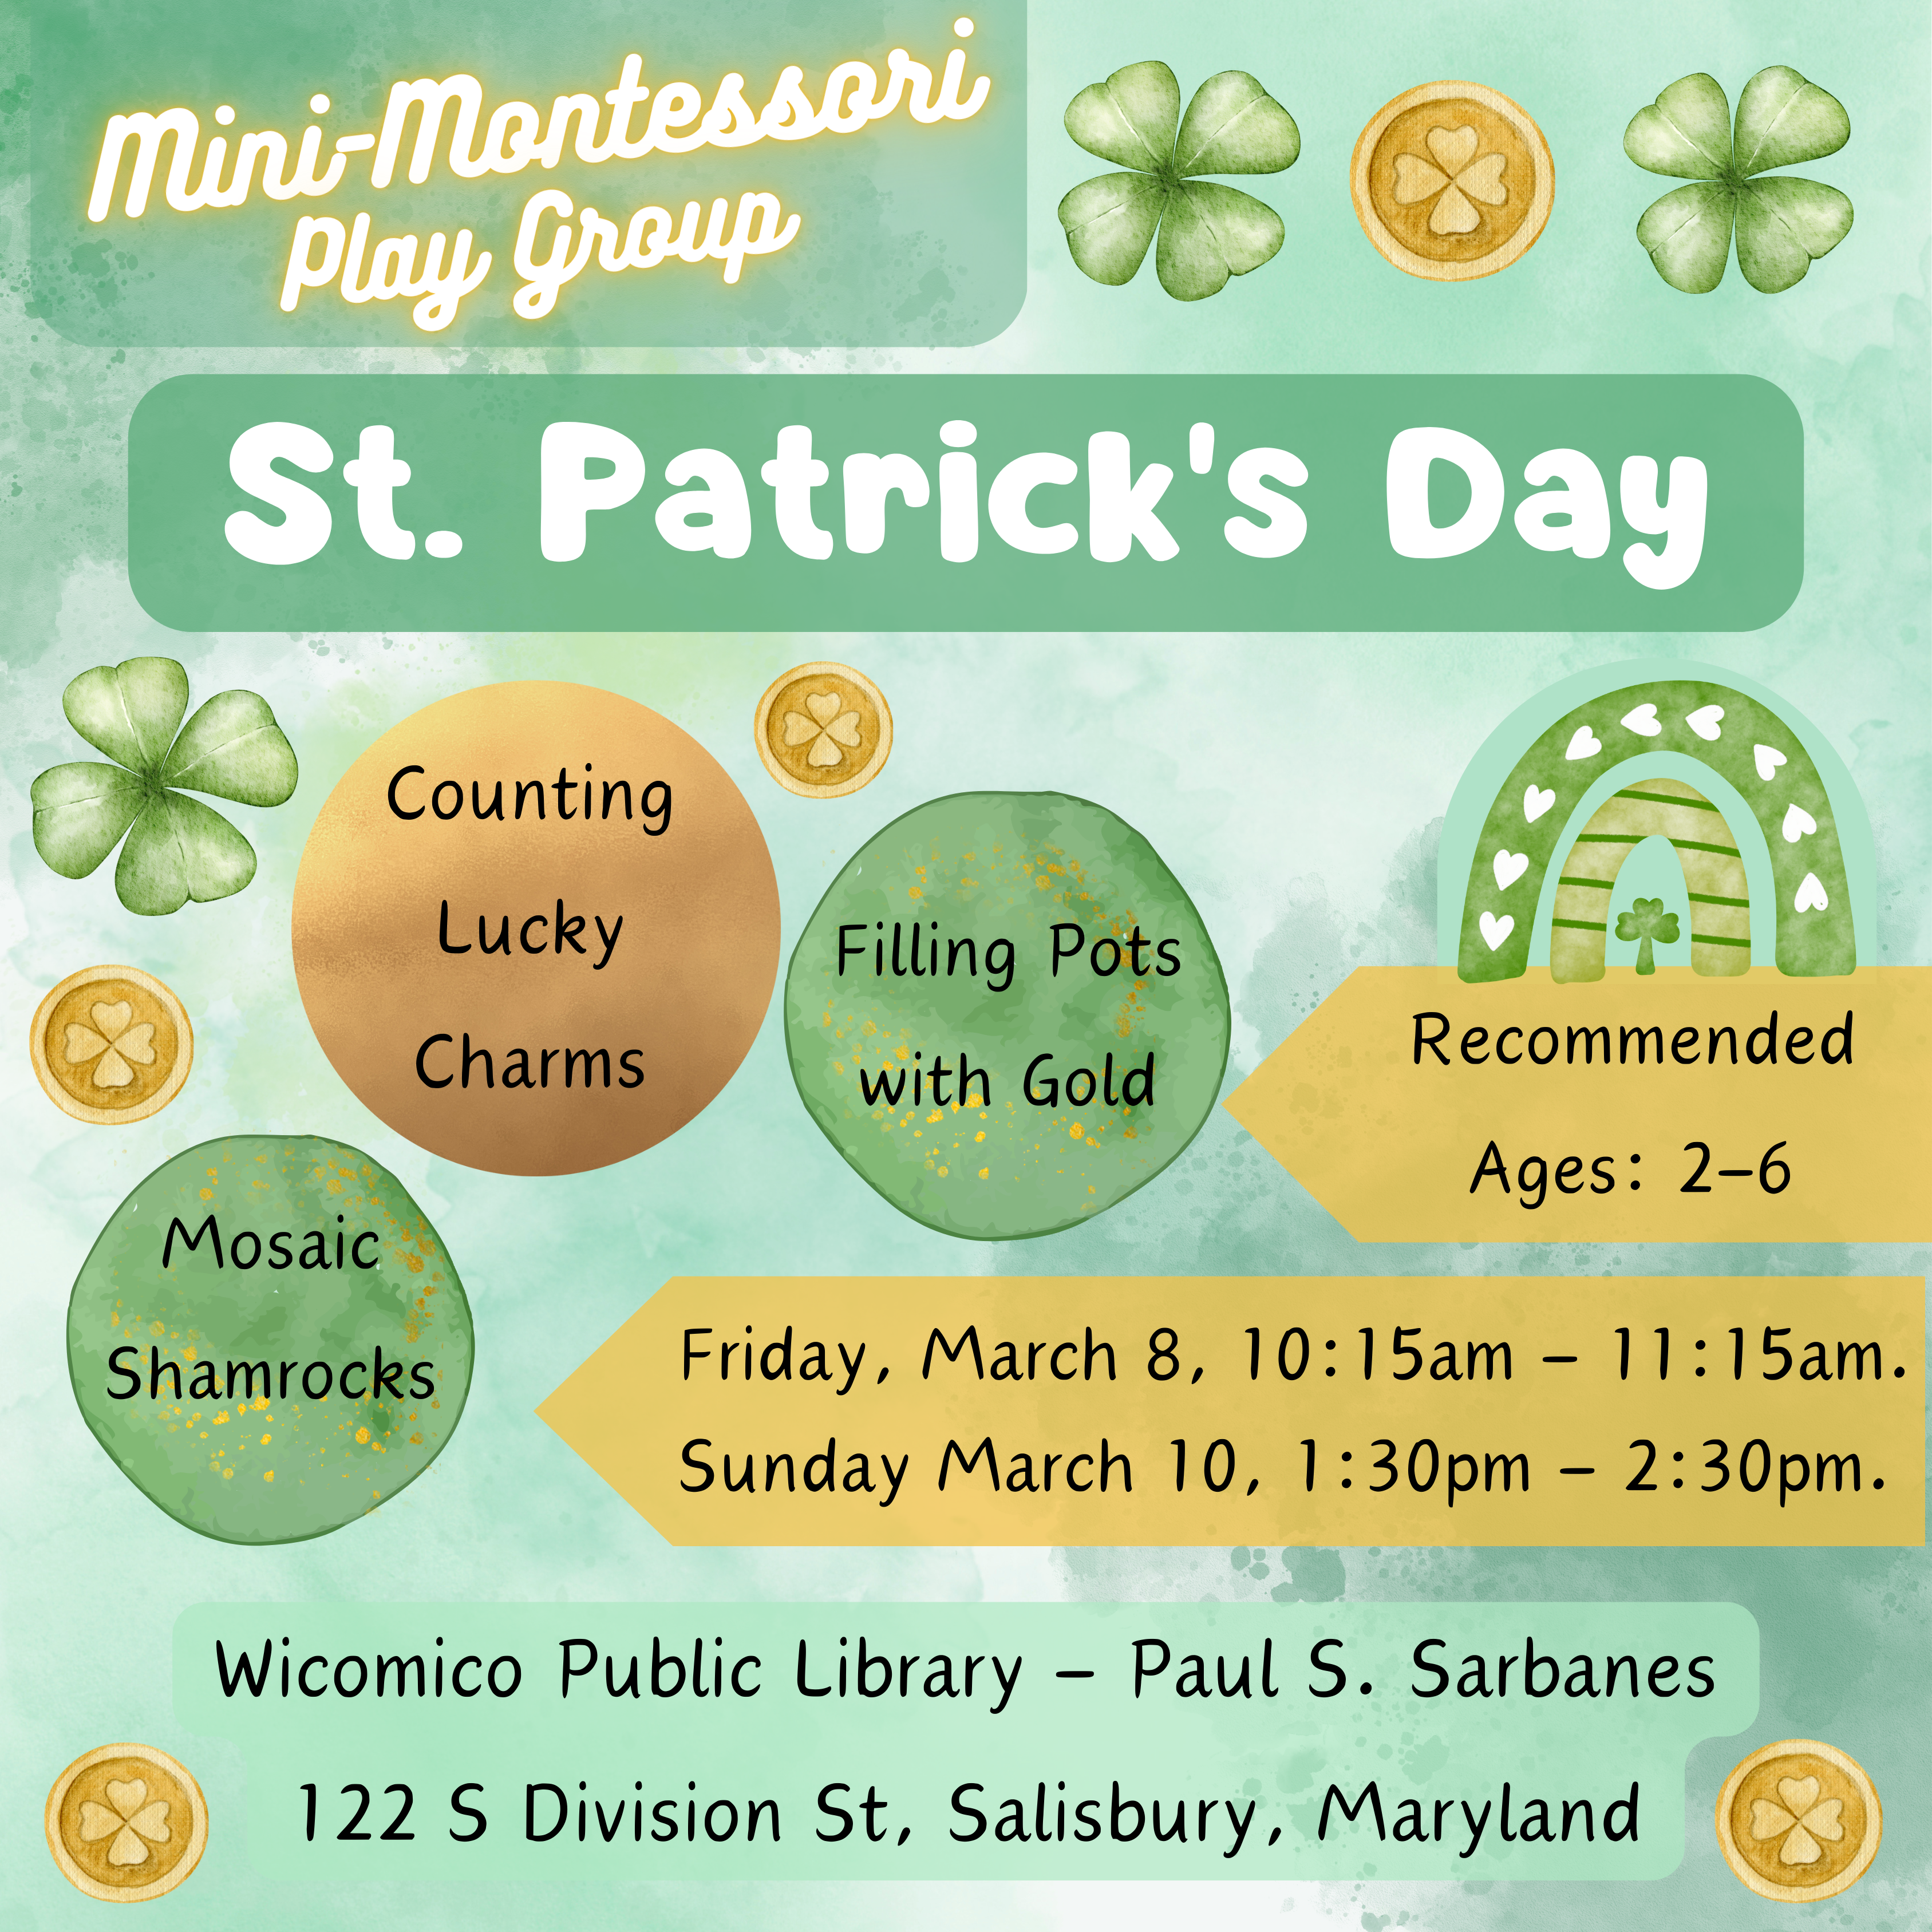 St. Patrick's Day: Mosaic Shamrocks, Counting Luck Charms, and Filling Pots with Gold